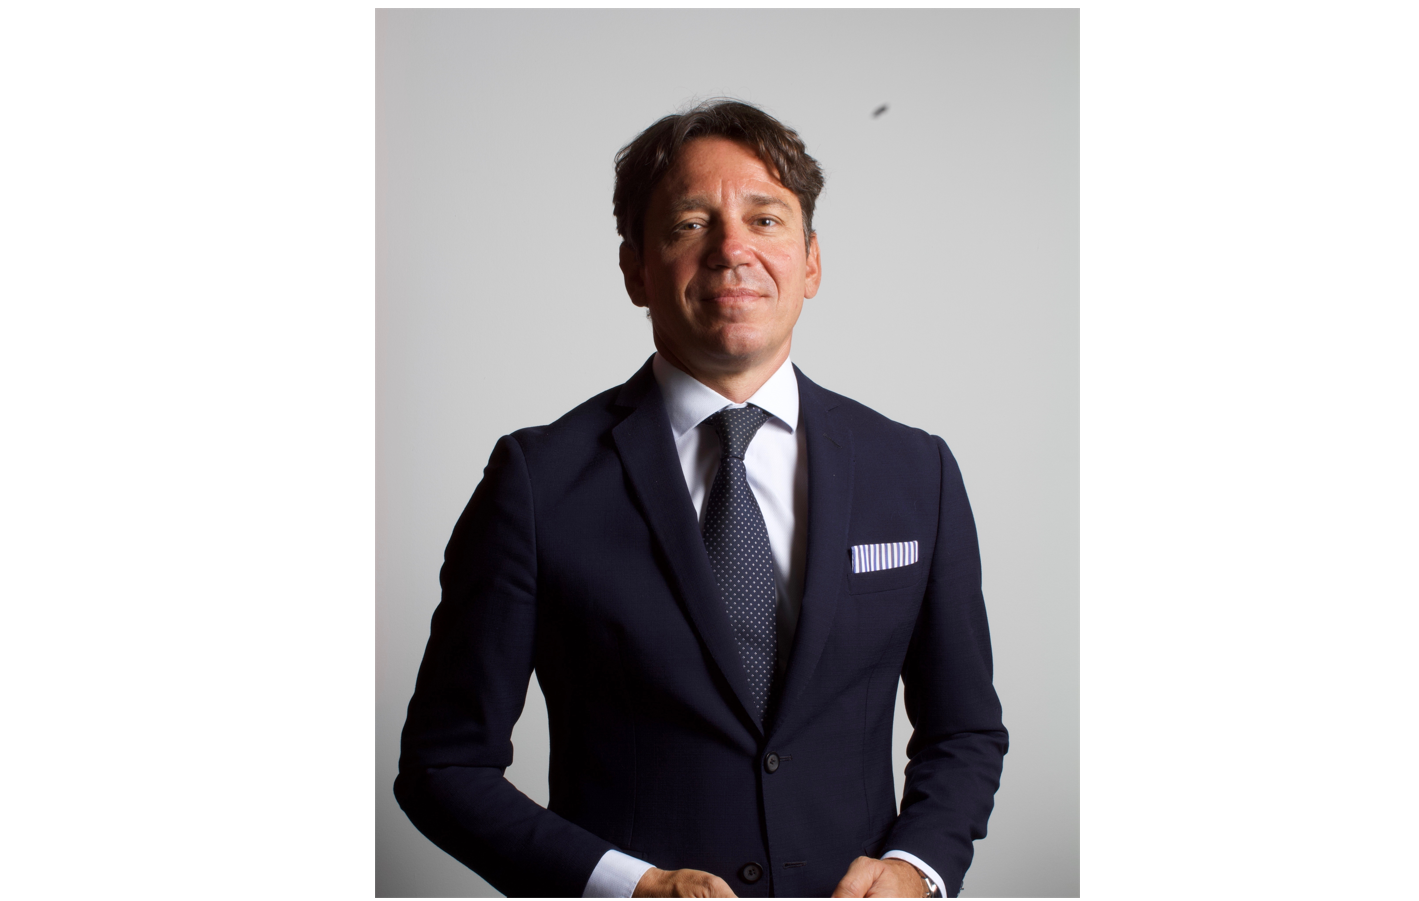 Nicola Pomi as General Manager of the Azimut Yachts brand